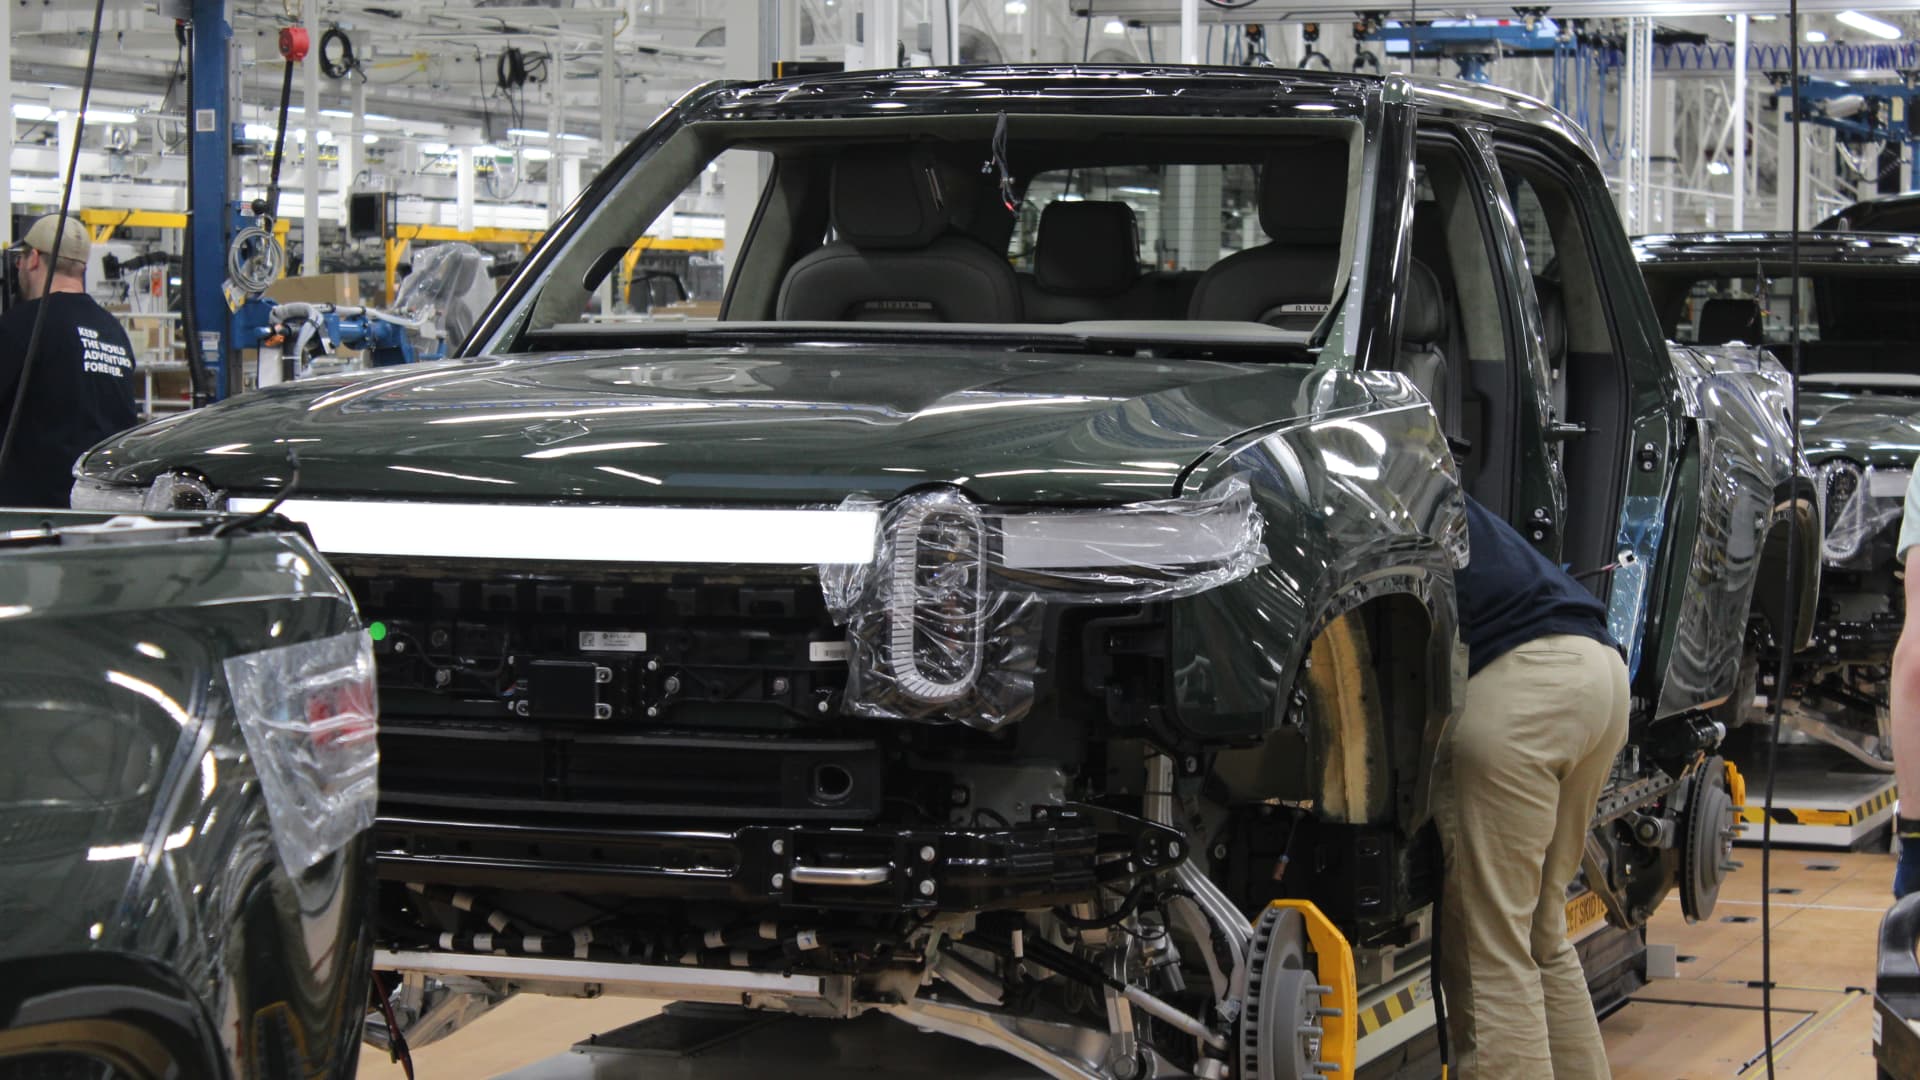 Rivian says it is still on track to build 25,000 electric cars by 2022